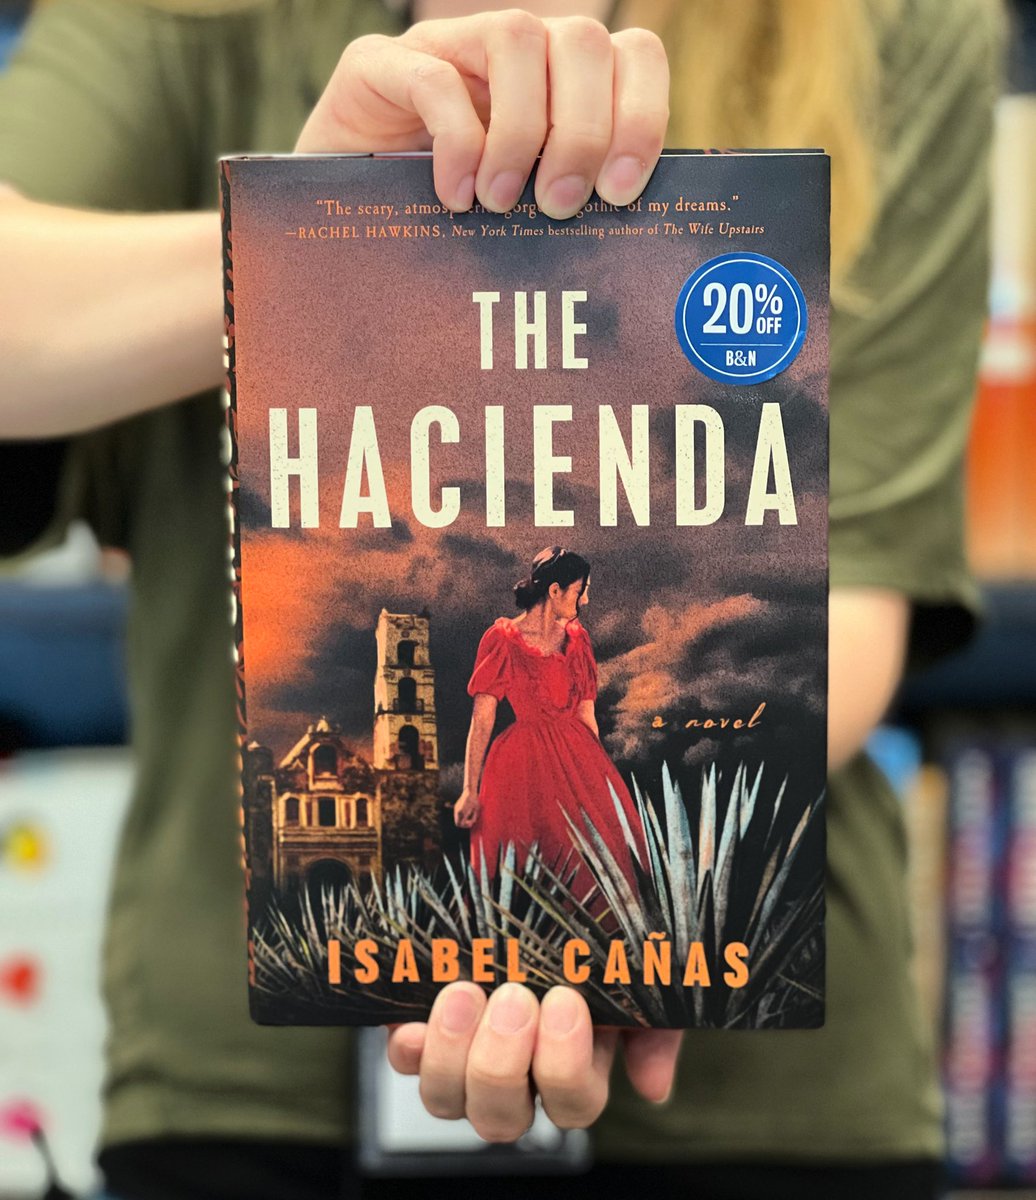 Is there anything better than staying in bed and reading? BN’s Discover Pick, The Hacienda, by Isabel Canas, is the perfect read on a dreary day. Described as Mexican Gothic meets Rebecca, The Hacienda is the next read for fans of Gothic horror!
#bndiscoverpick #bestbninbuffalo